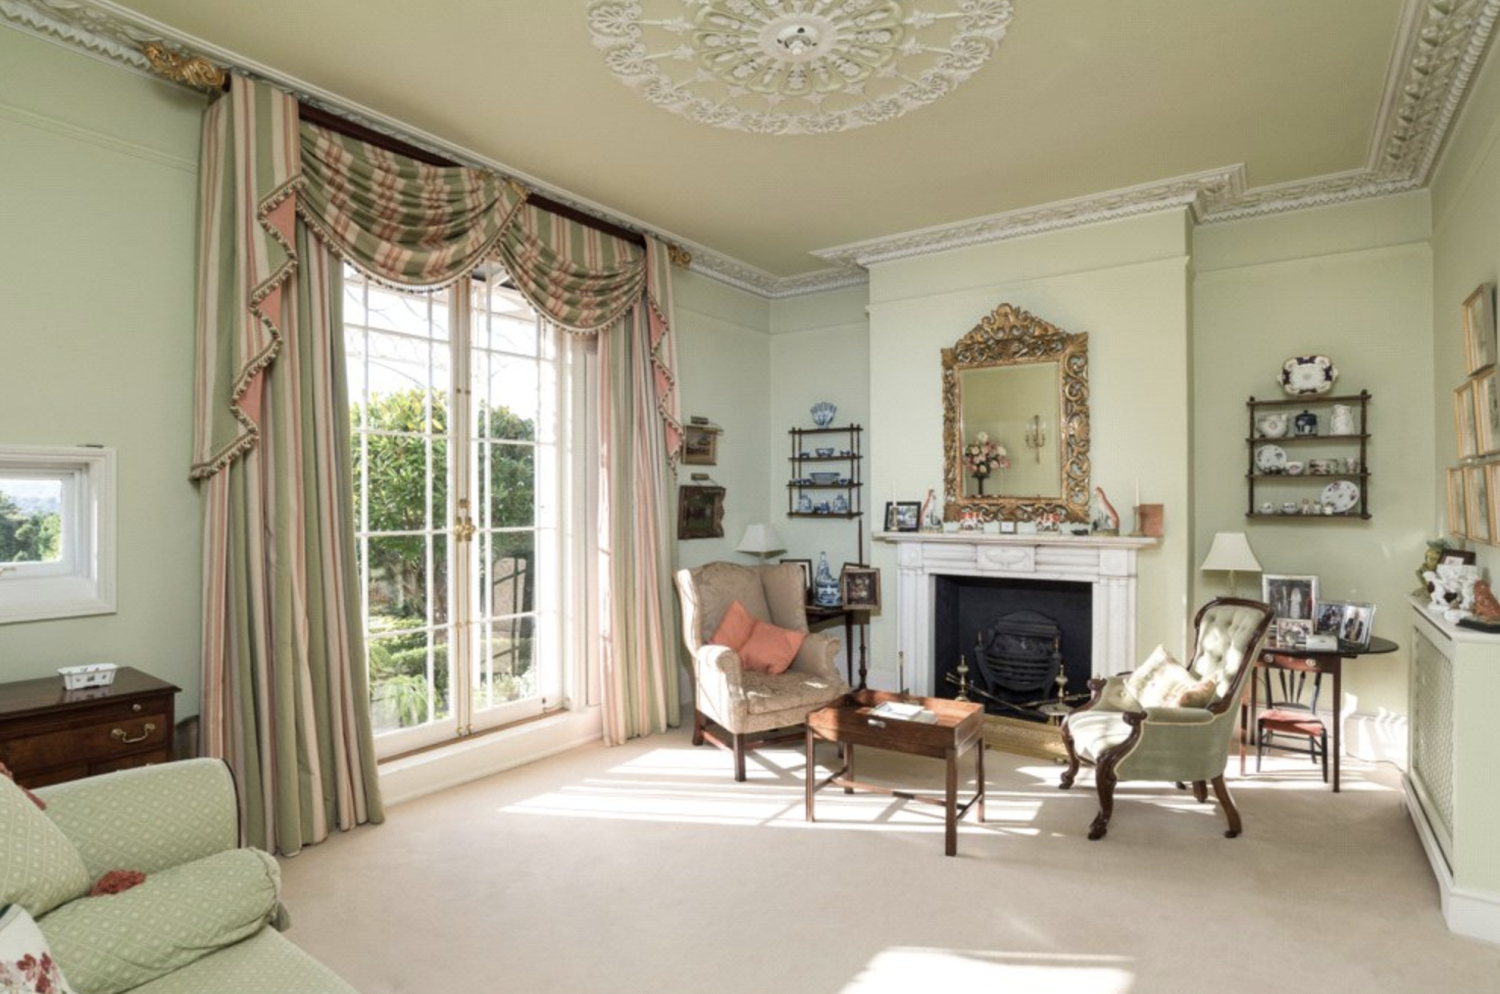 a grand drawing room with ruffled curtains and period furniture to match the original Georgian features